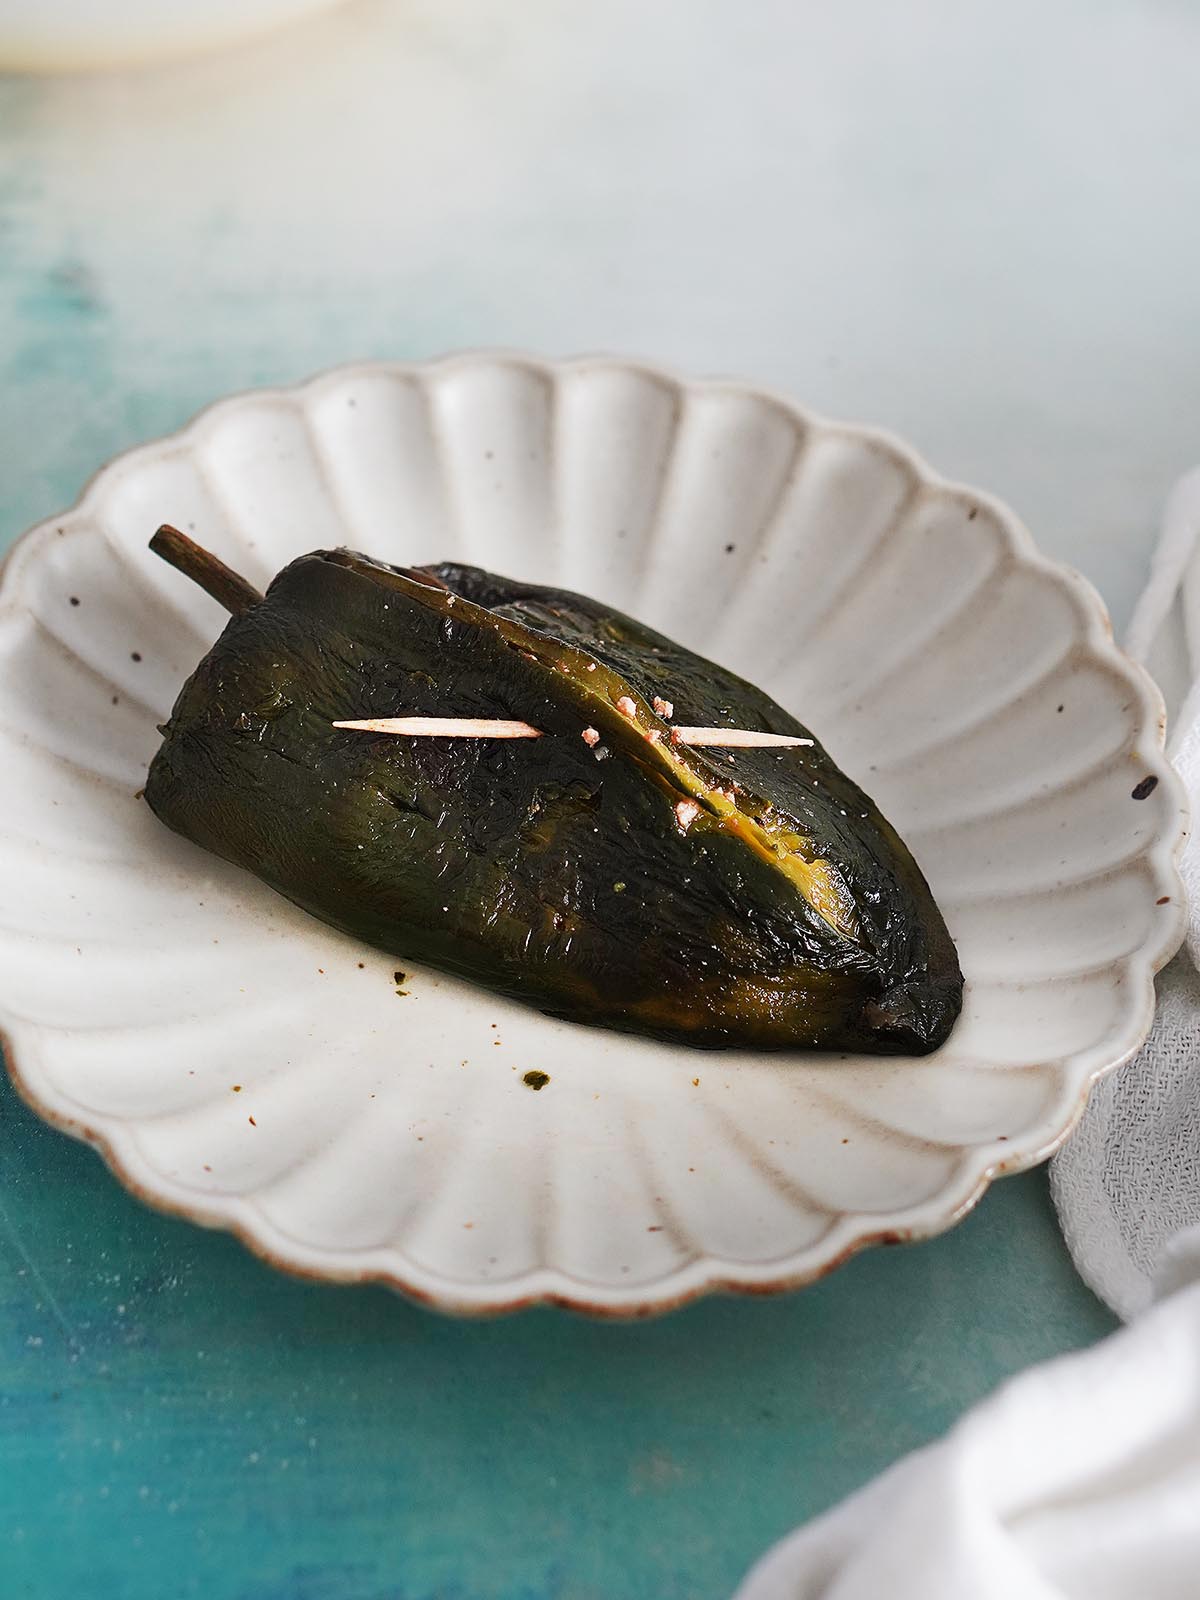 A roasted poblano pepper stuffed with a toothpick across the slit.